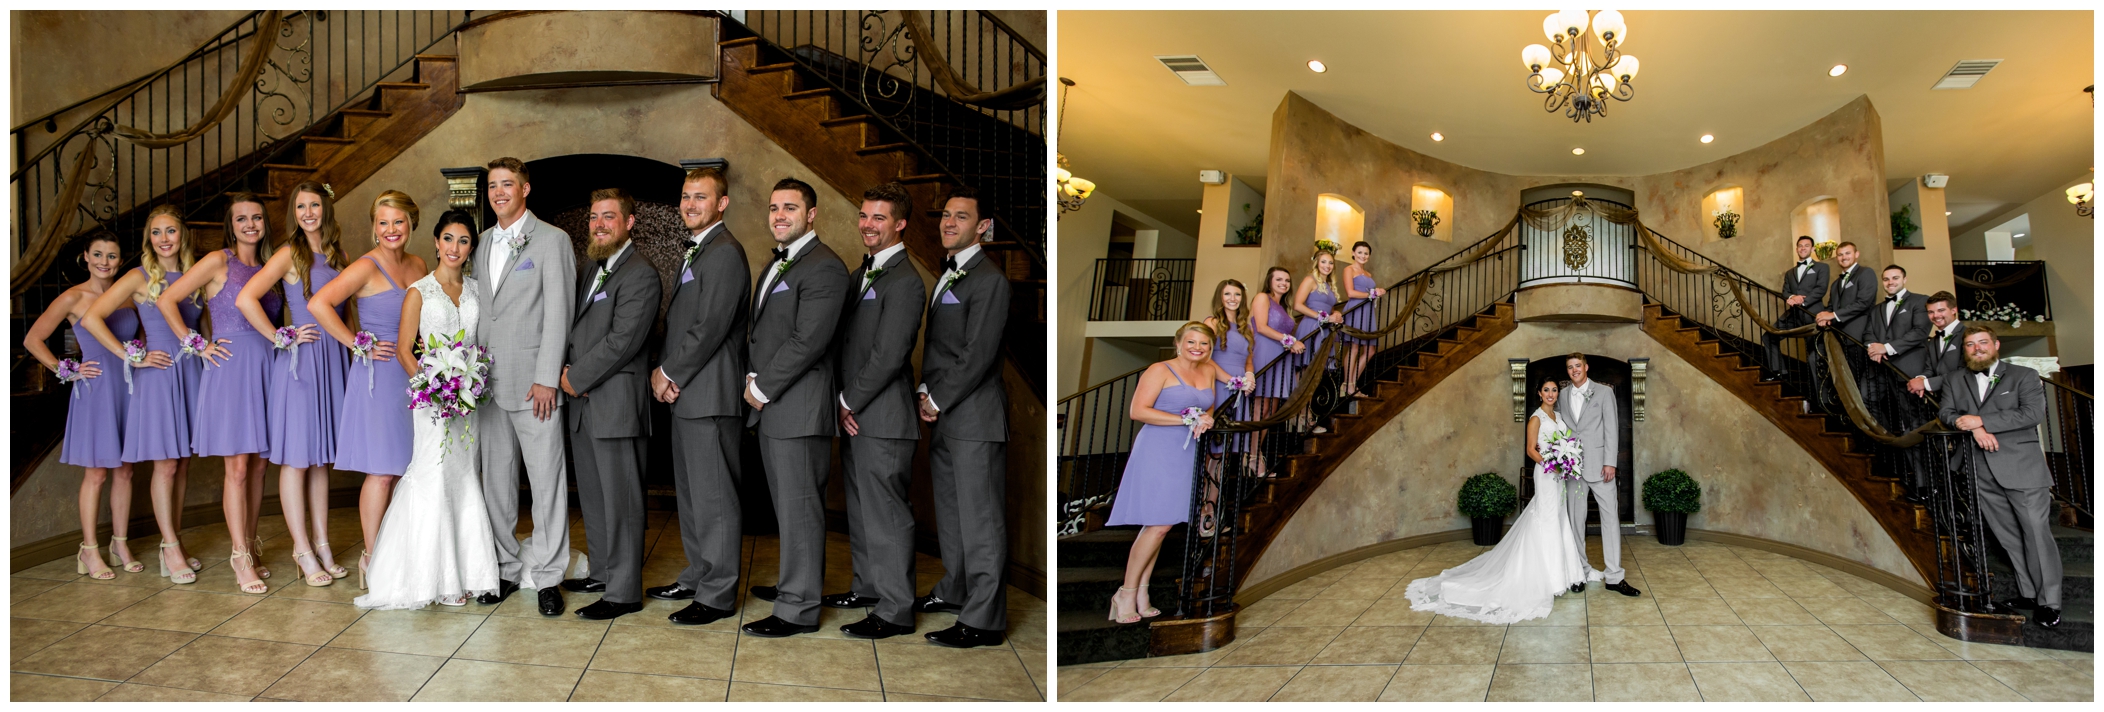 bridal party in light purple and gray at Colorado wedding 